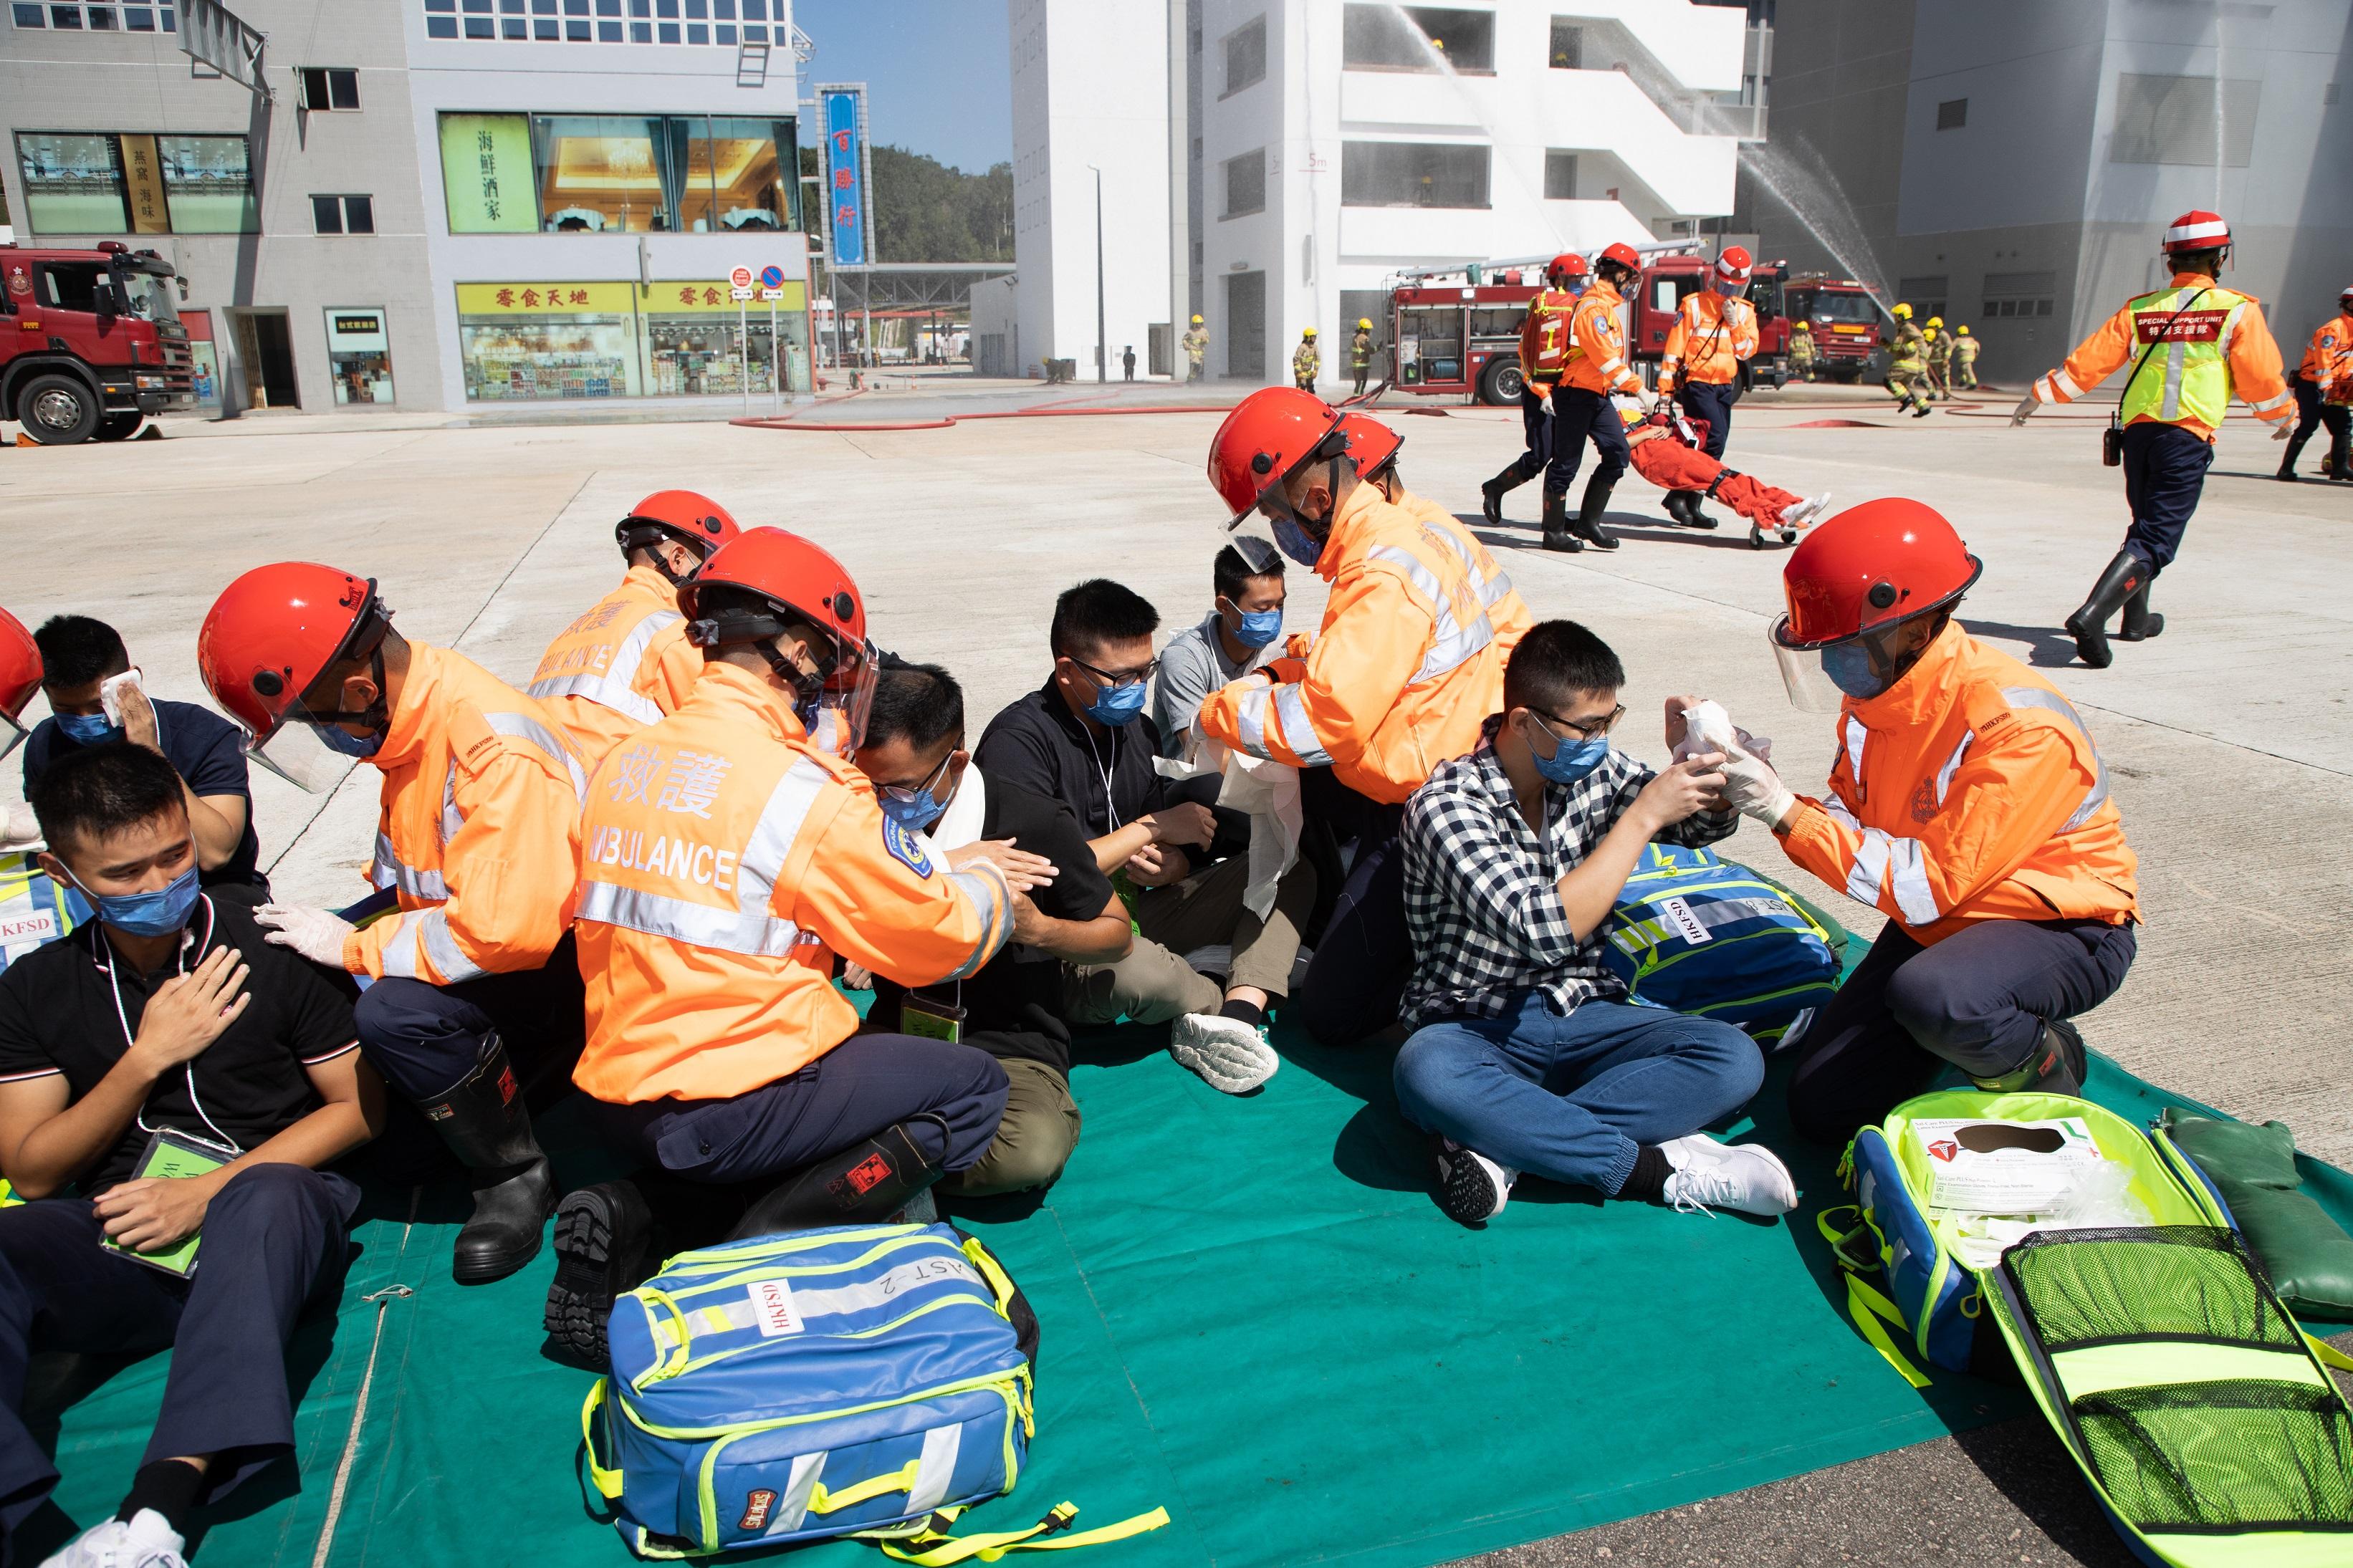 The Chief Secretary for Administration, Mr Chan Kwok-ki, reviewed the Fire Services passing-out parade at the Fire and Ambulance Services Academy today (October 21). Photo shows graduates demonstrating rescue techniques.